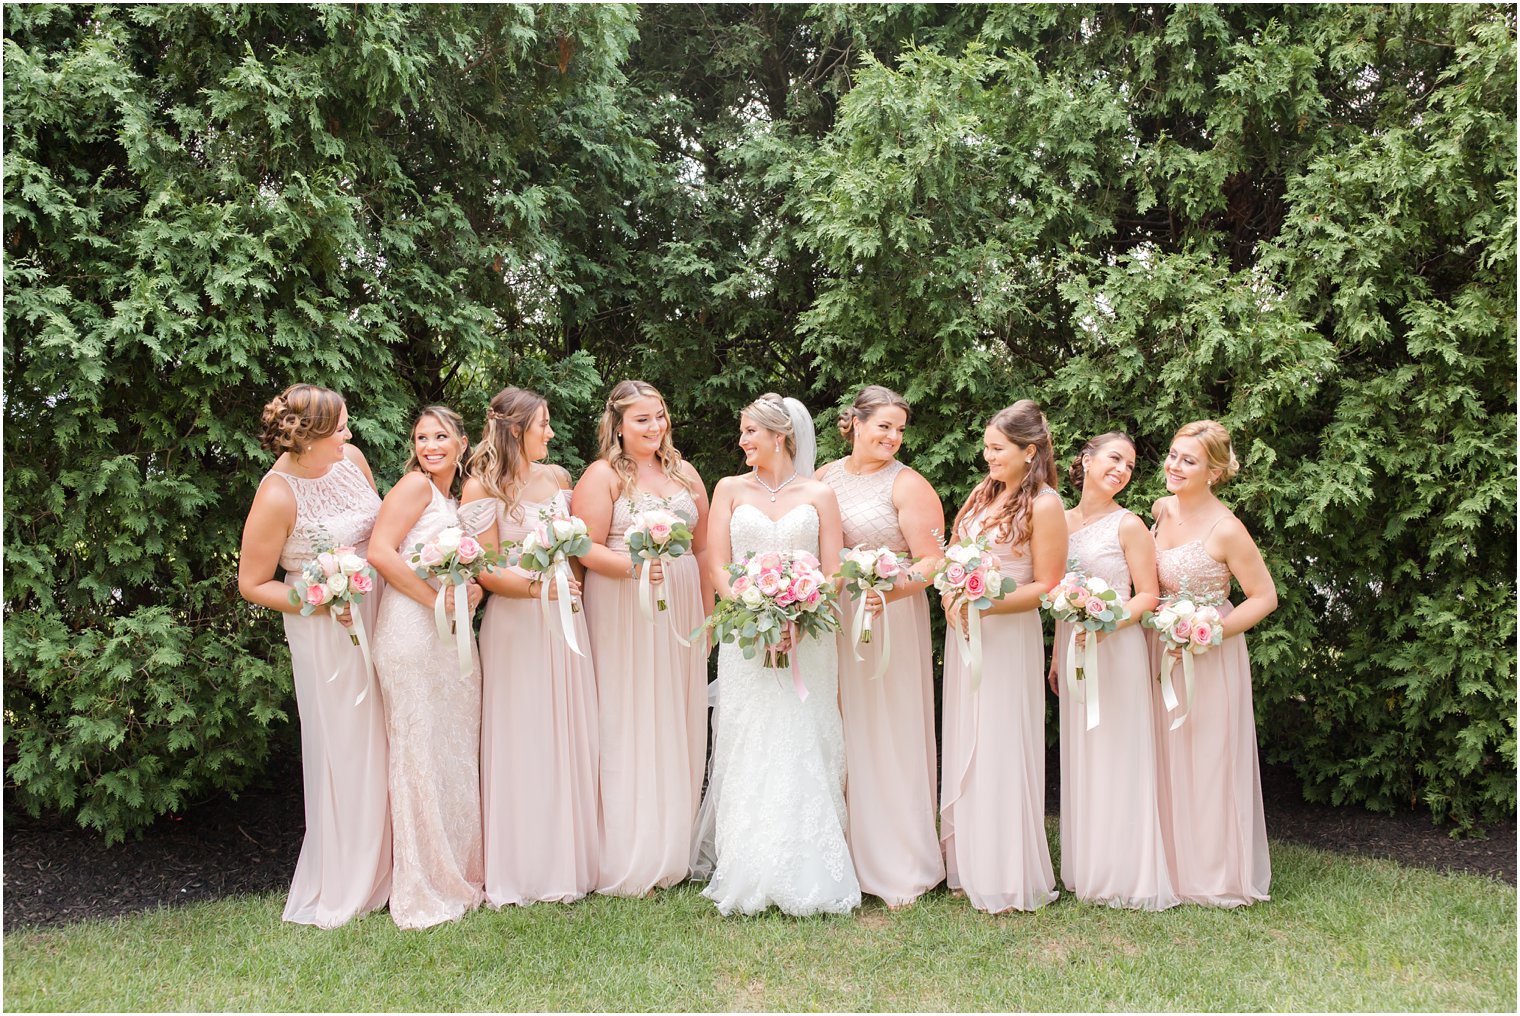 bride in Sottero and Midgley wedding gown with bridesmaids in Adrianna Papell gowns